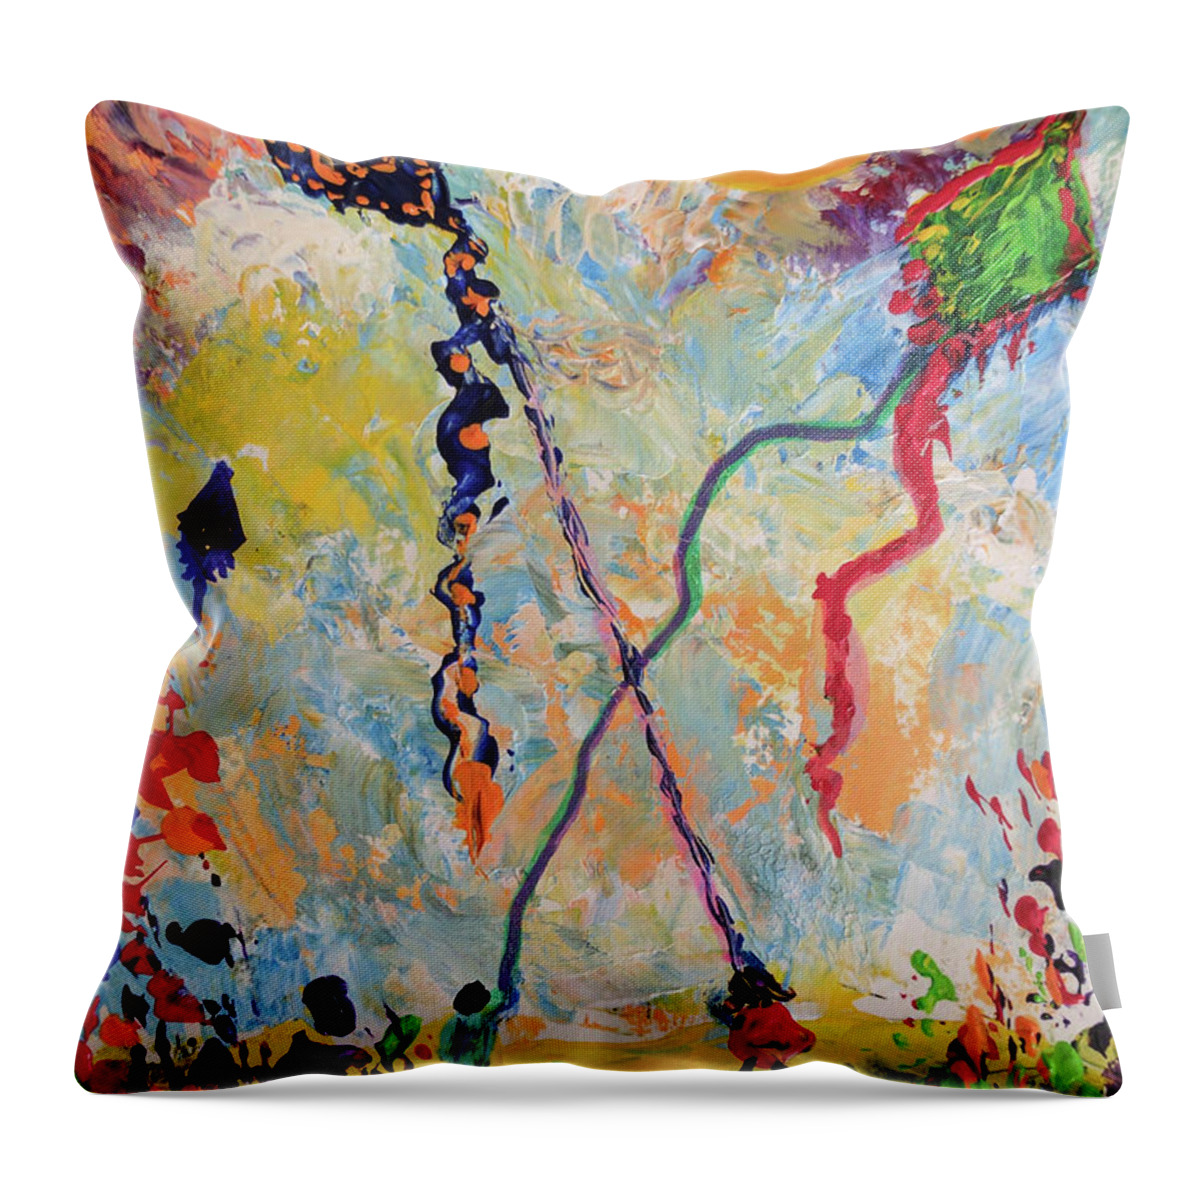 Kite Throw Pillow featuring the painting Soaring High by Sarabjit Singh